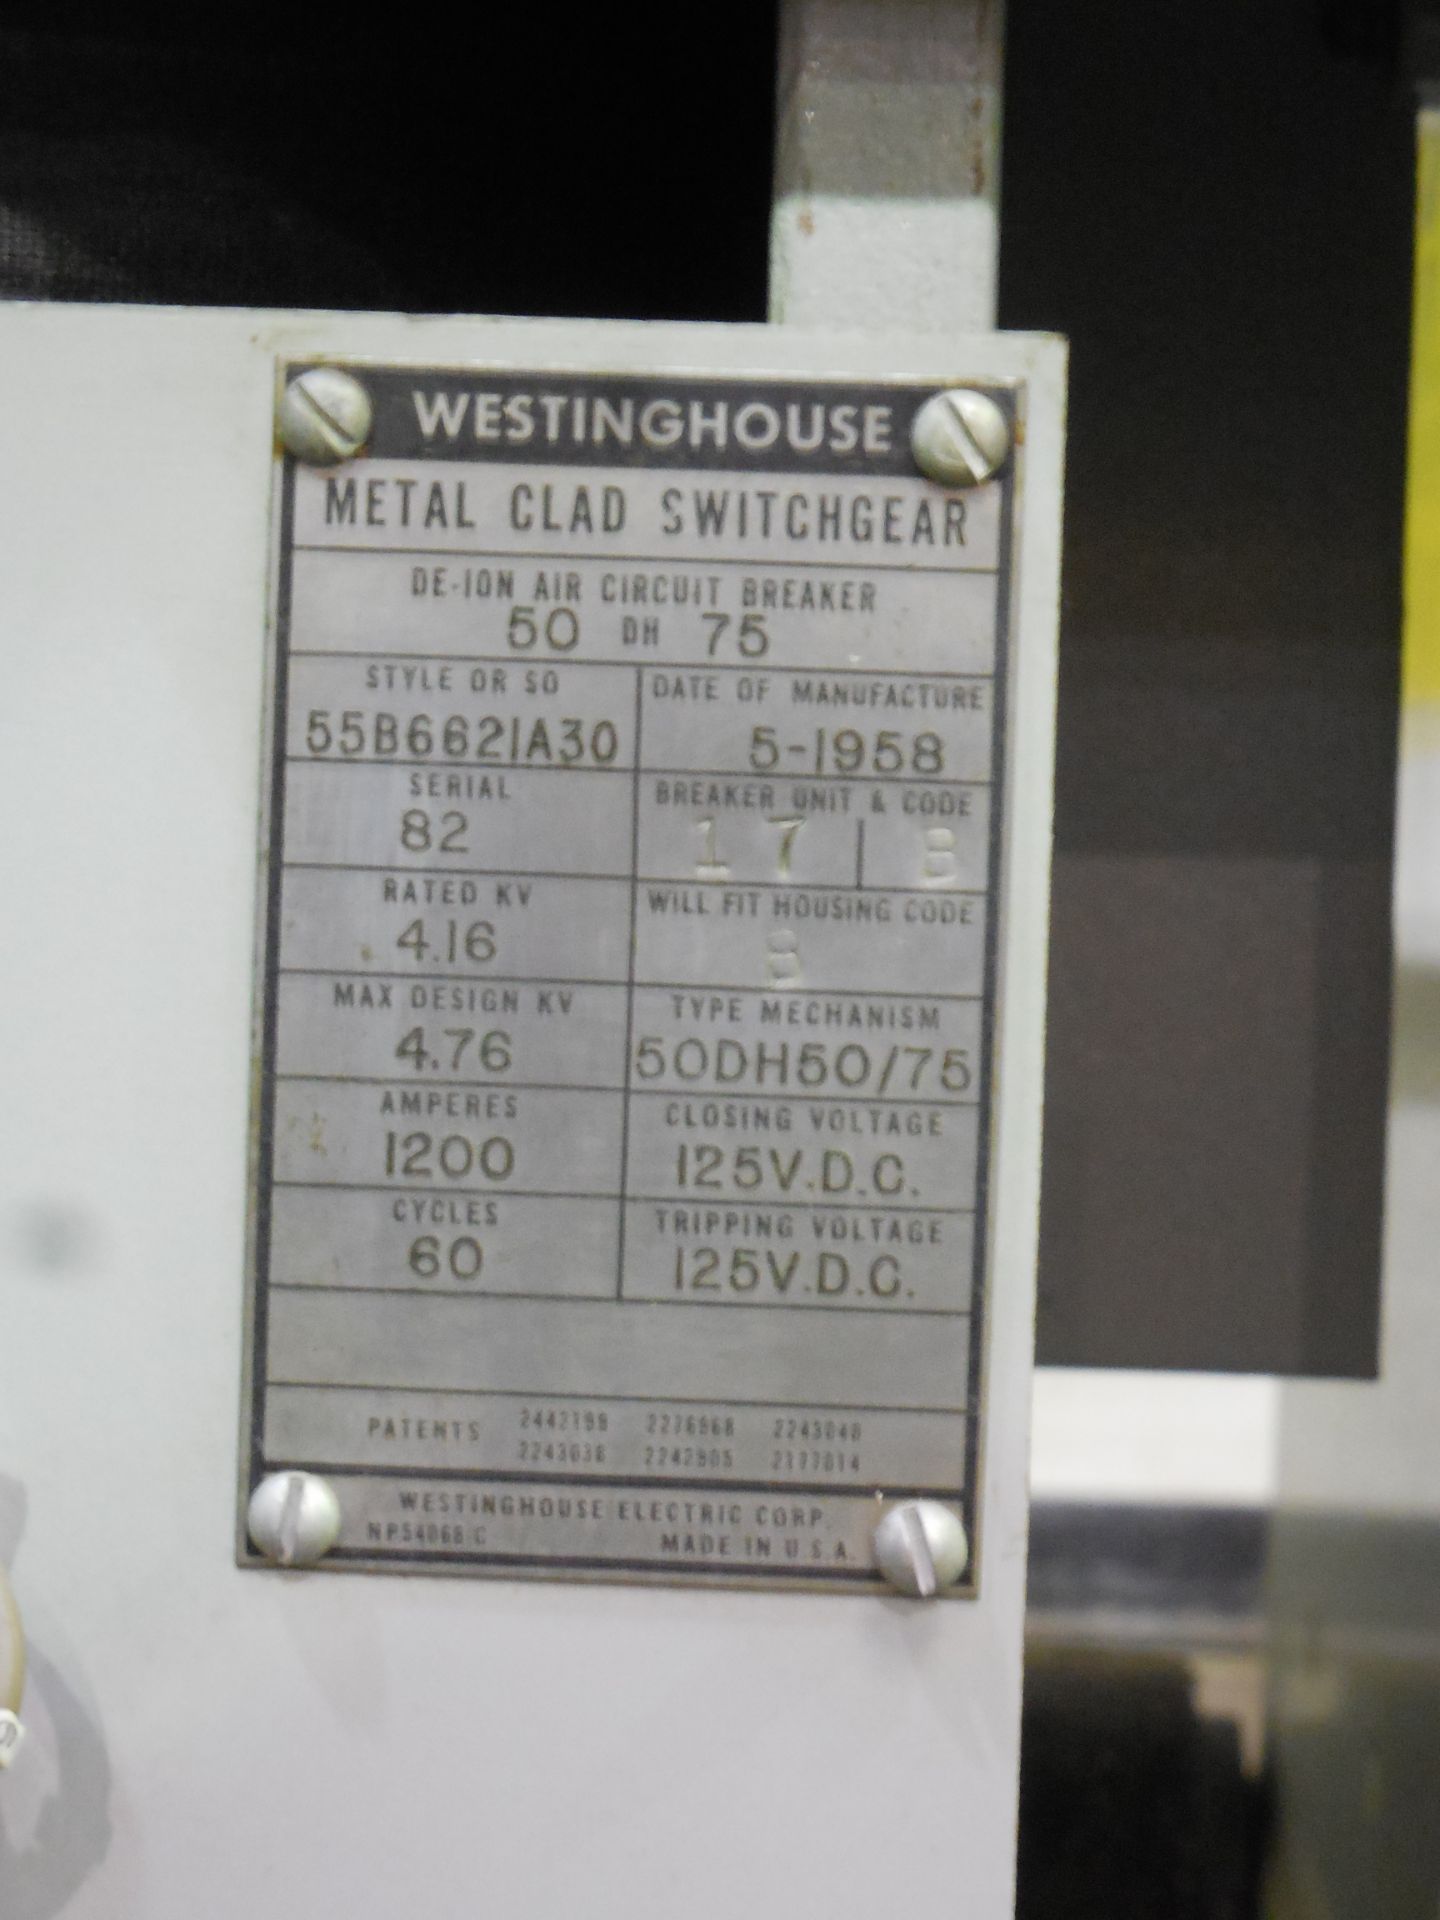 Westinghouse 50DH75 1200 Amp Metal Clad Switchgear De-Ion Air Circuit Breaker - Image 2 of 10